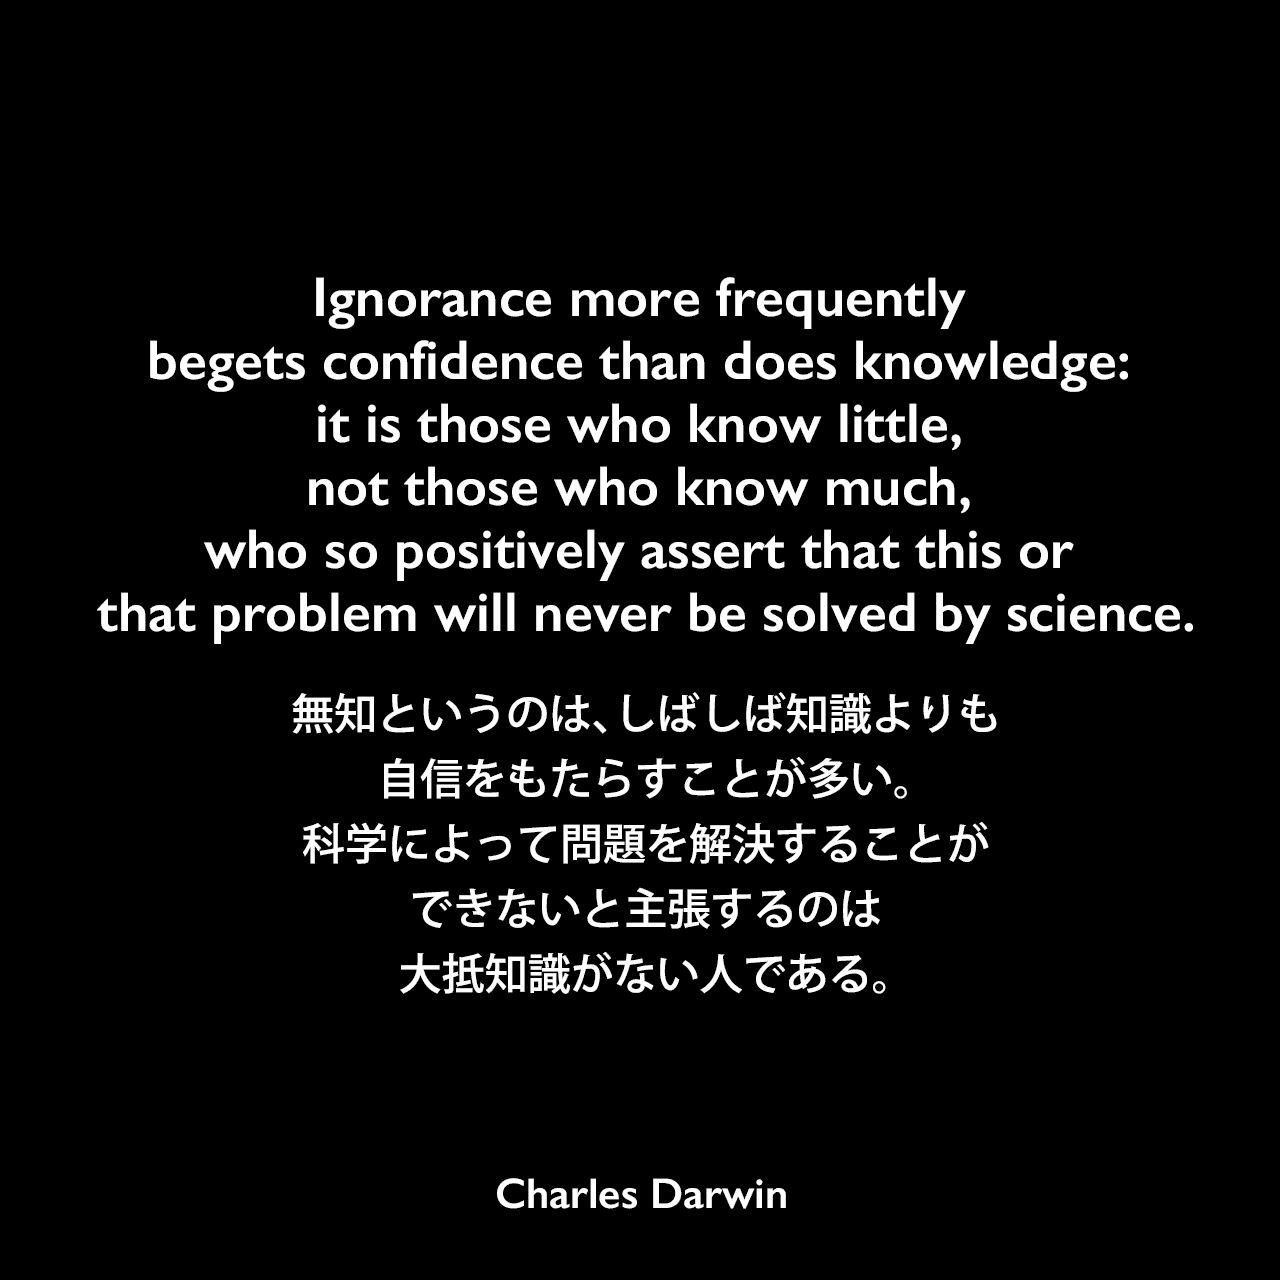 Ignorance more frequently begets confidence than does knowledge: it is those who know little, not those who know much, who so positively assert that this or that problem will never be solved by science.無知というのは、しばしば知識よりも自信をもたらすことが多い。科学によって問題を解決することができないと主張するのは大抵知識がない人である。- ダーウィンの本「人間の進化と性淘汰」よりCharles Darwin